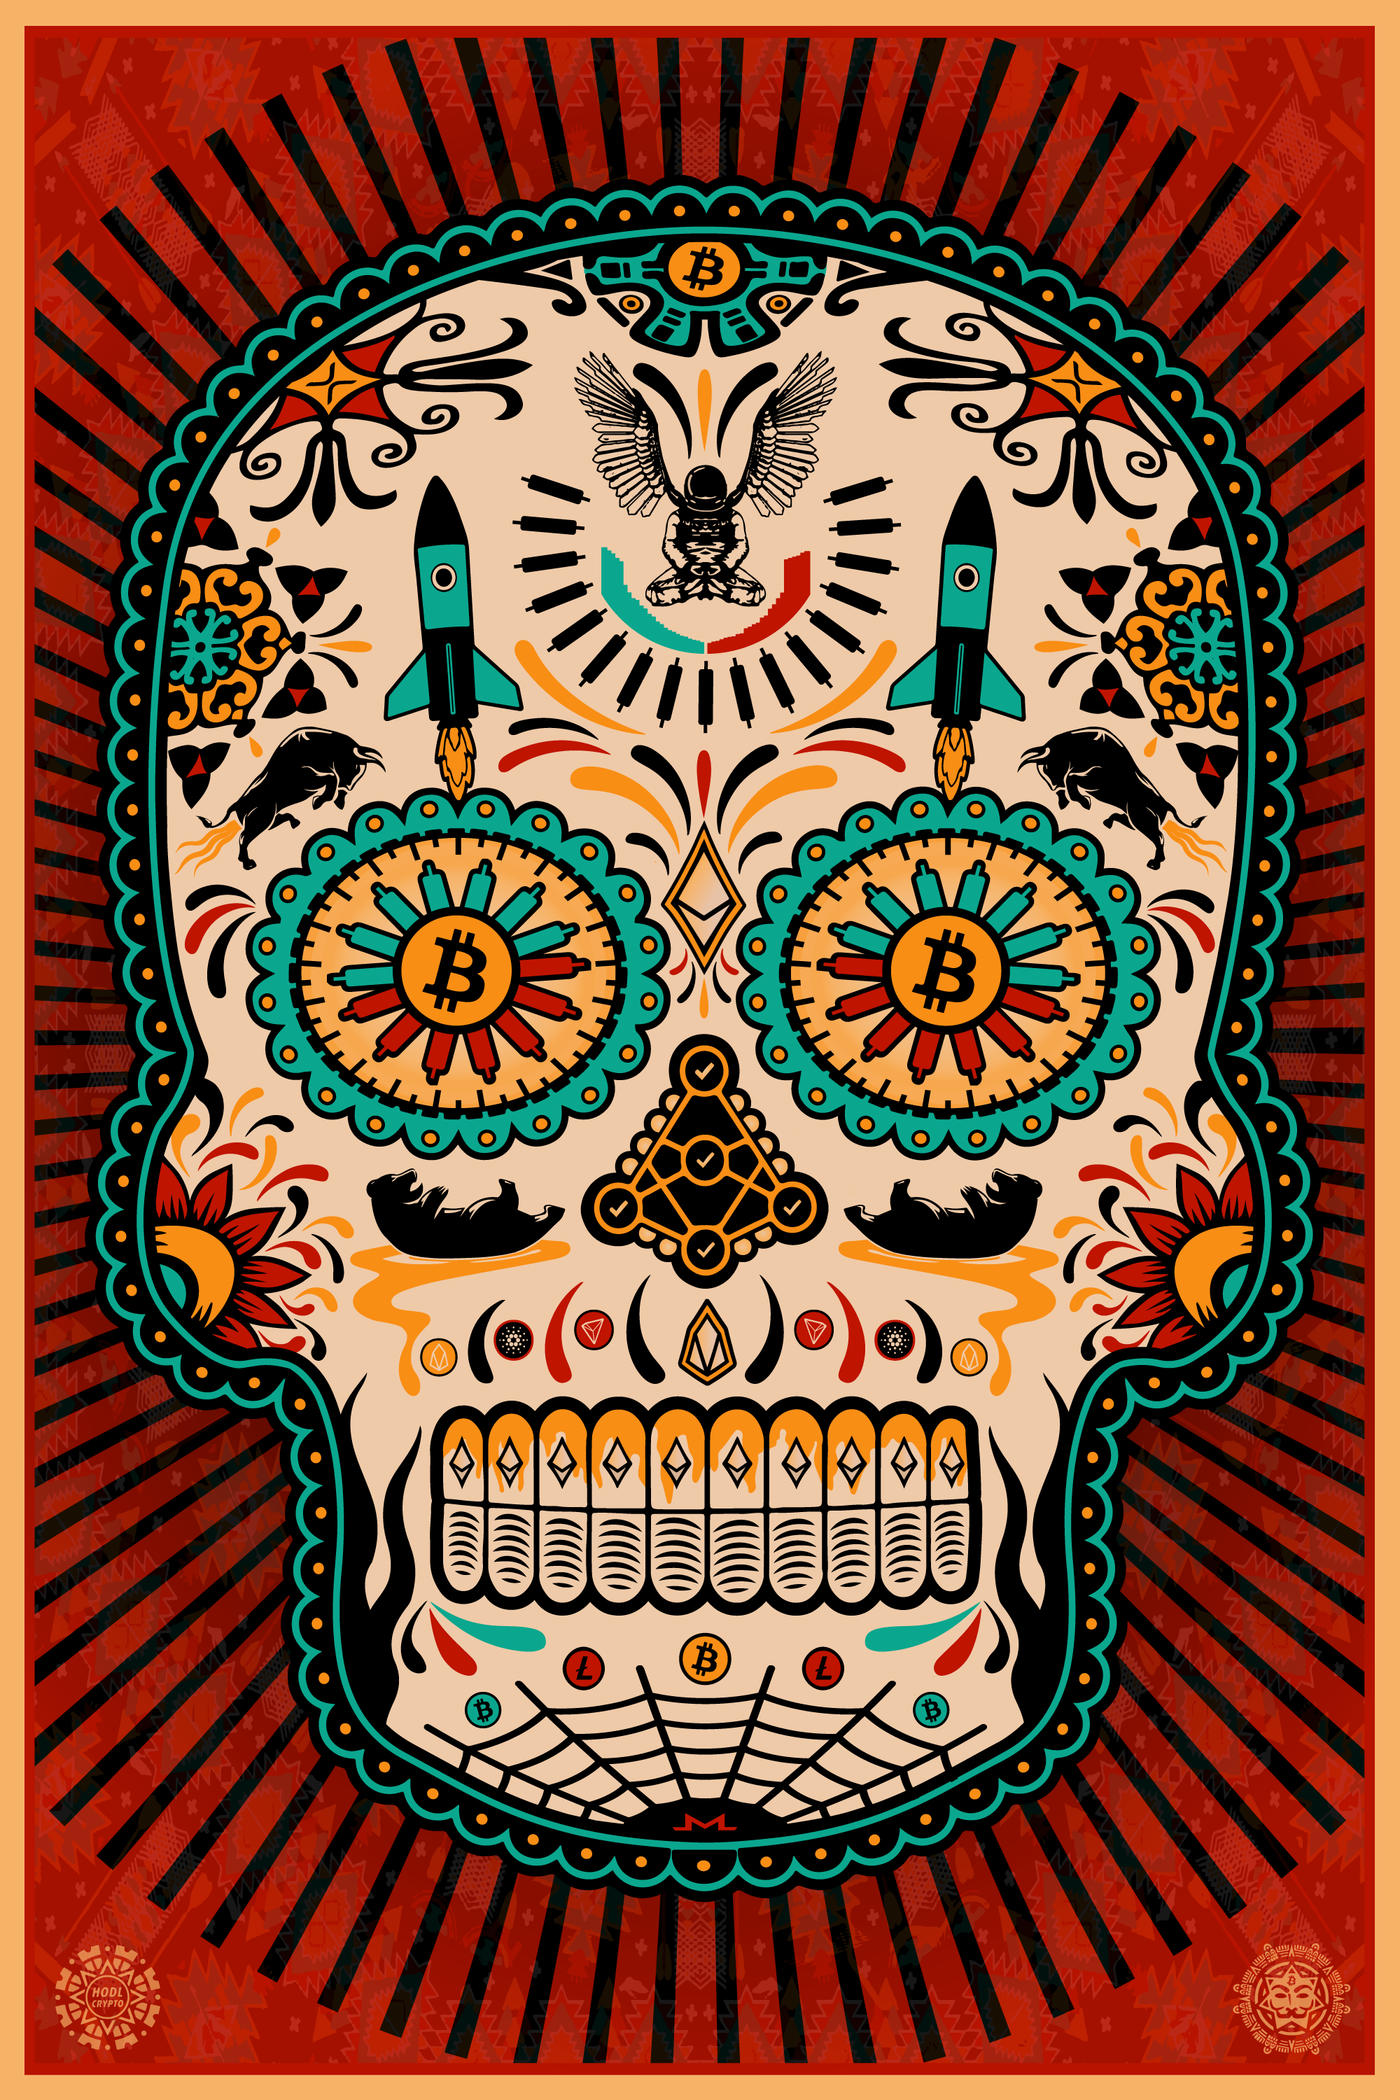 Day of the Dead, Dia de Muertos by artist Lucho Poletti, a.k.a. hodl crypto